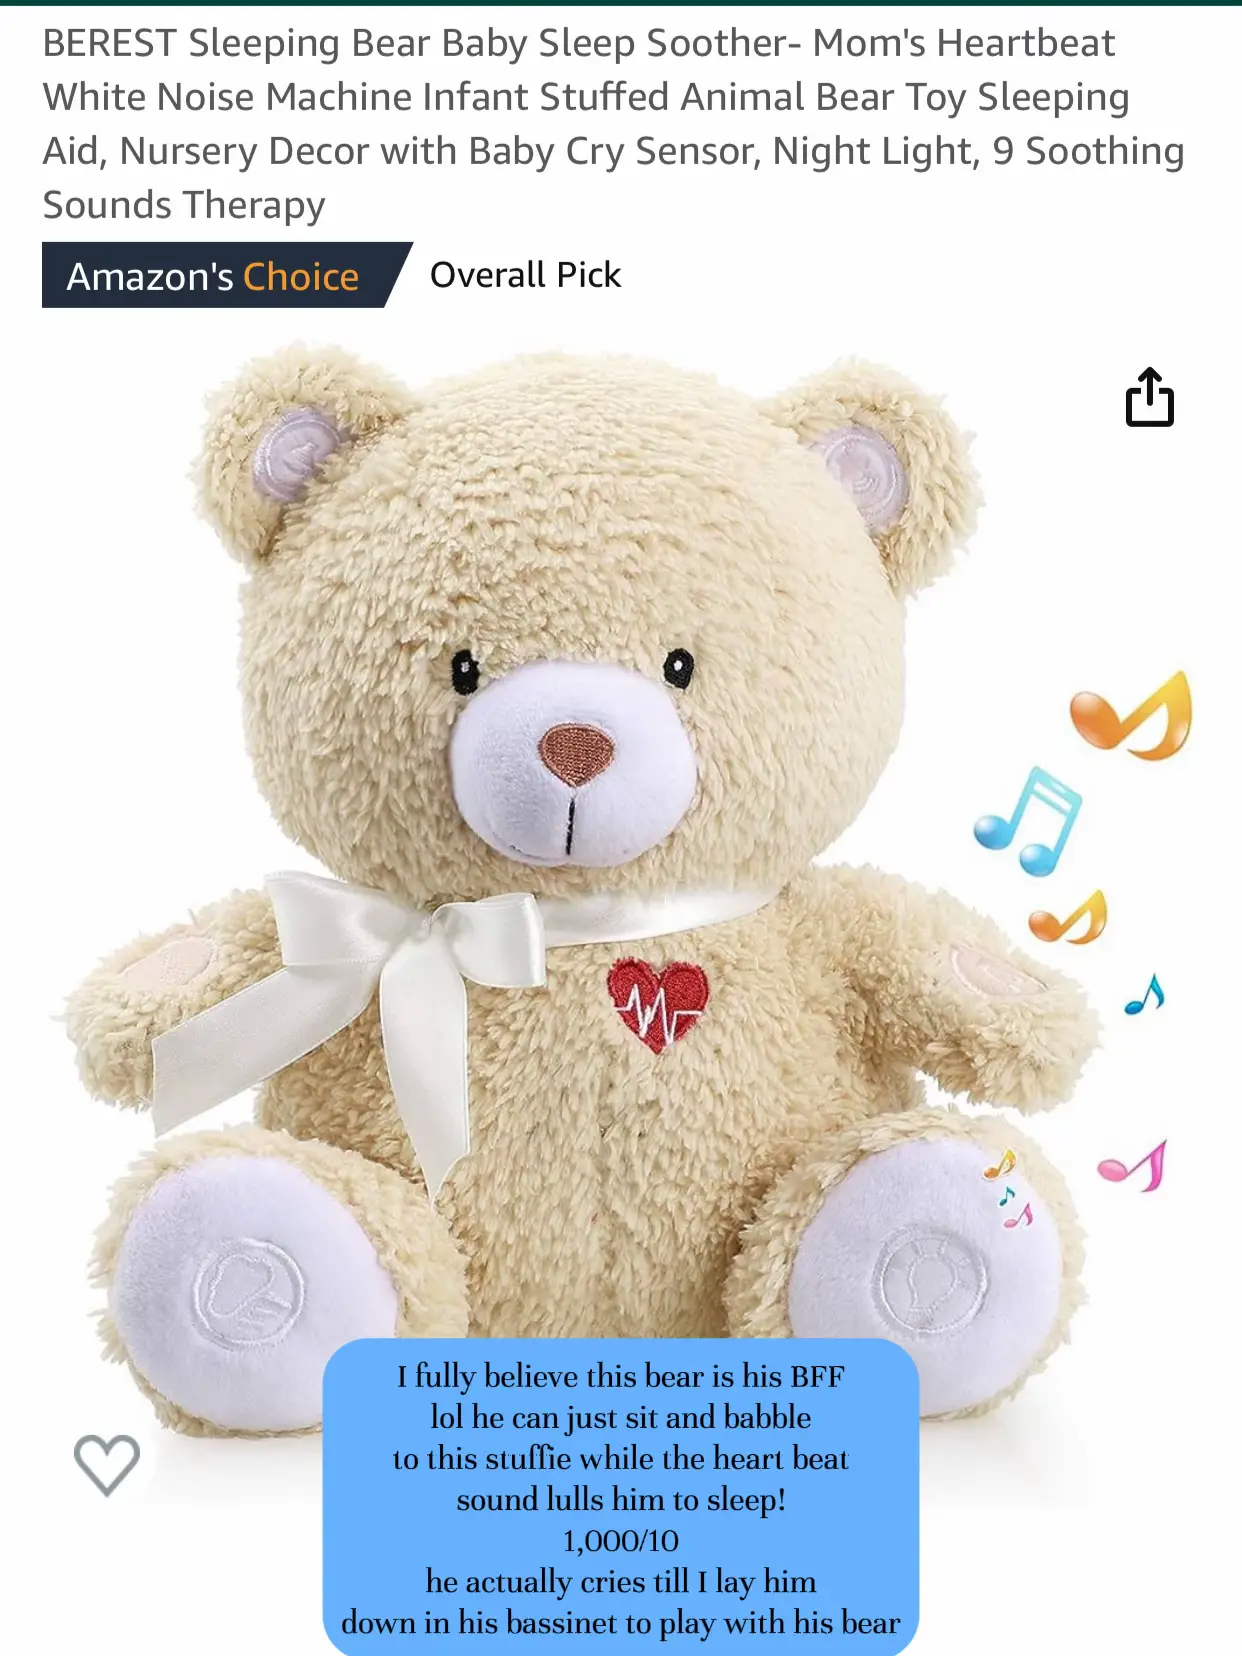  A teddy bear with a white noise machine and a soothing soother.